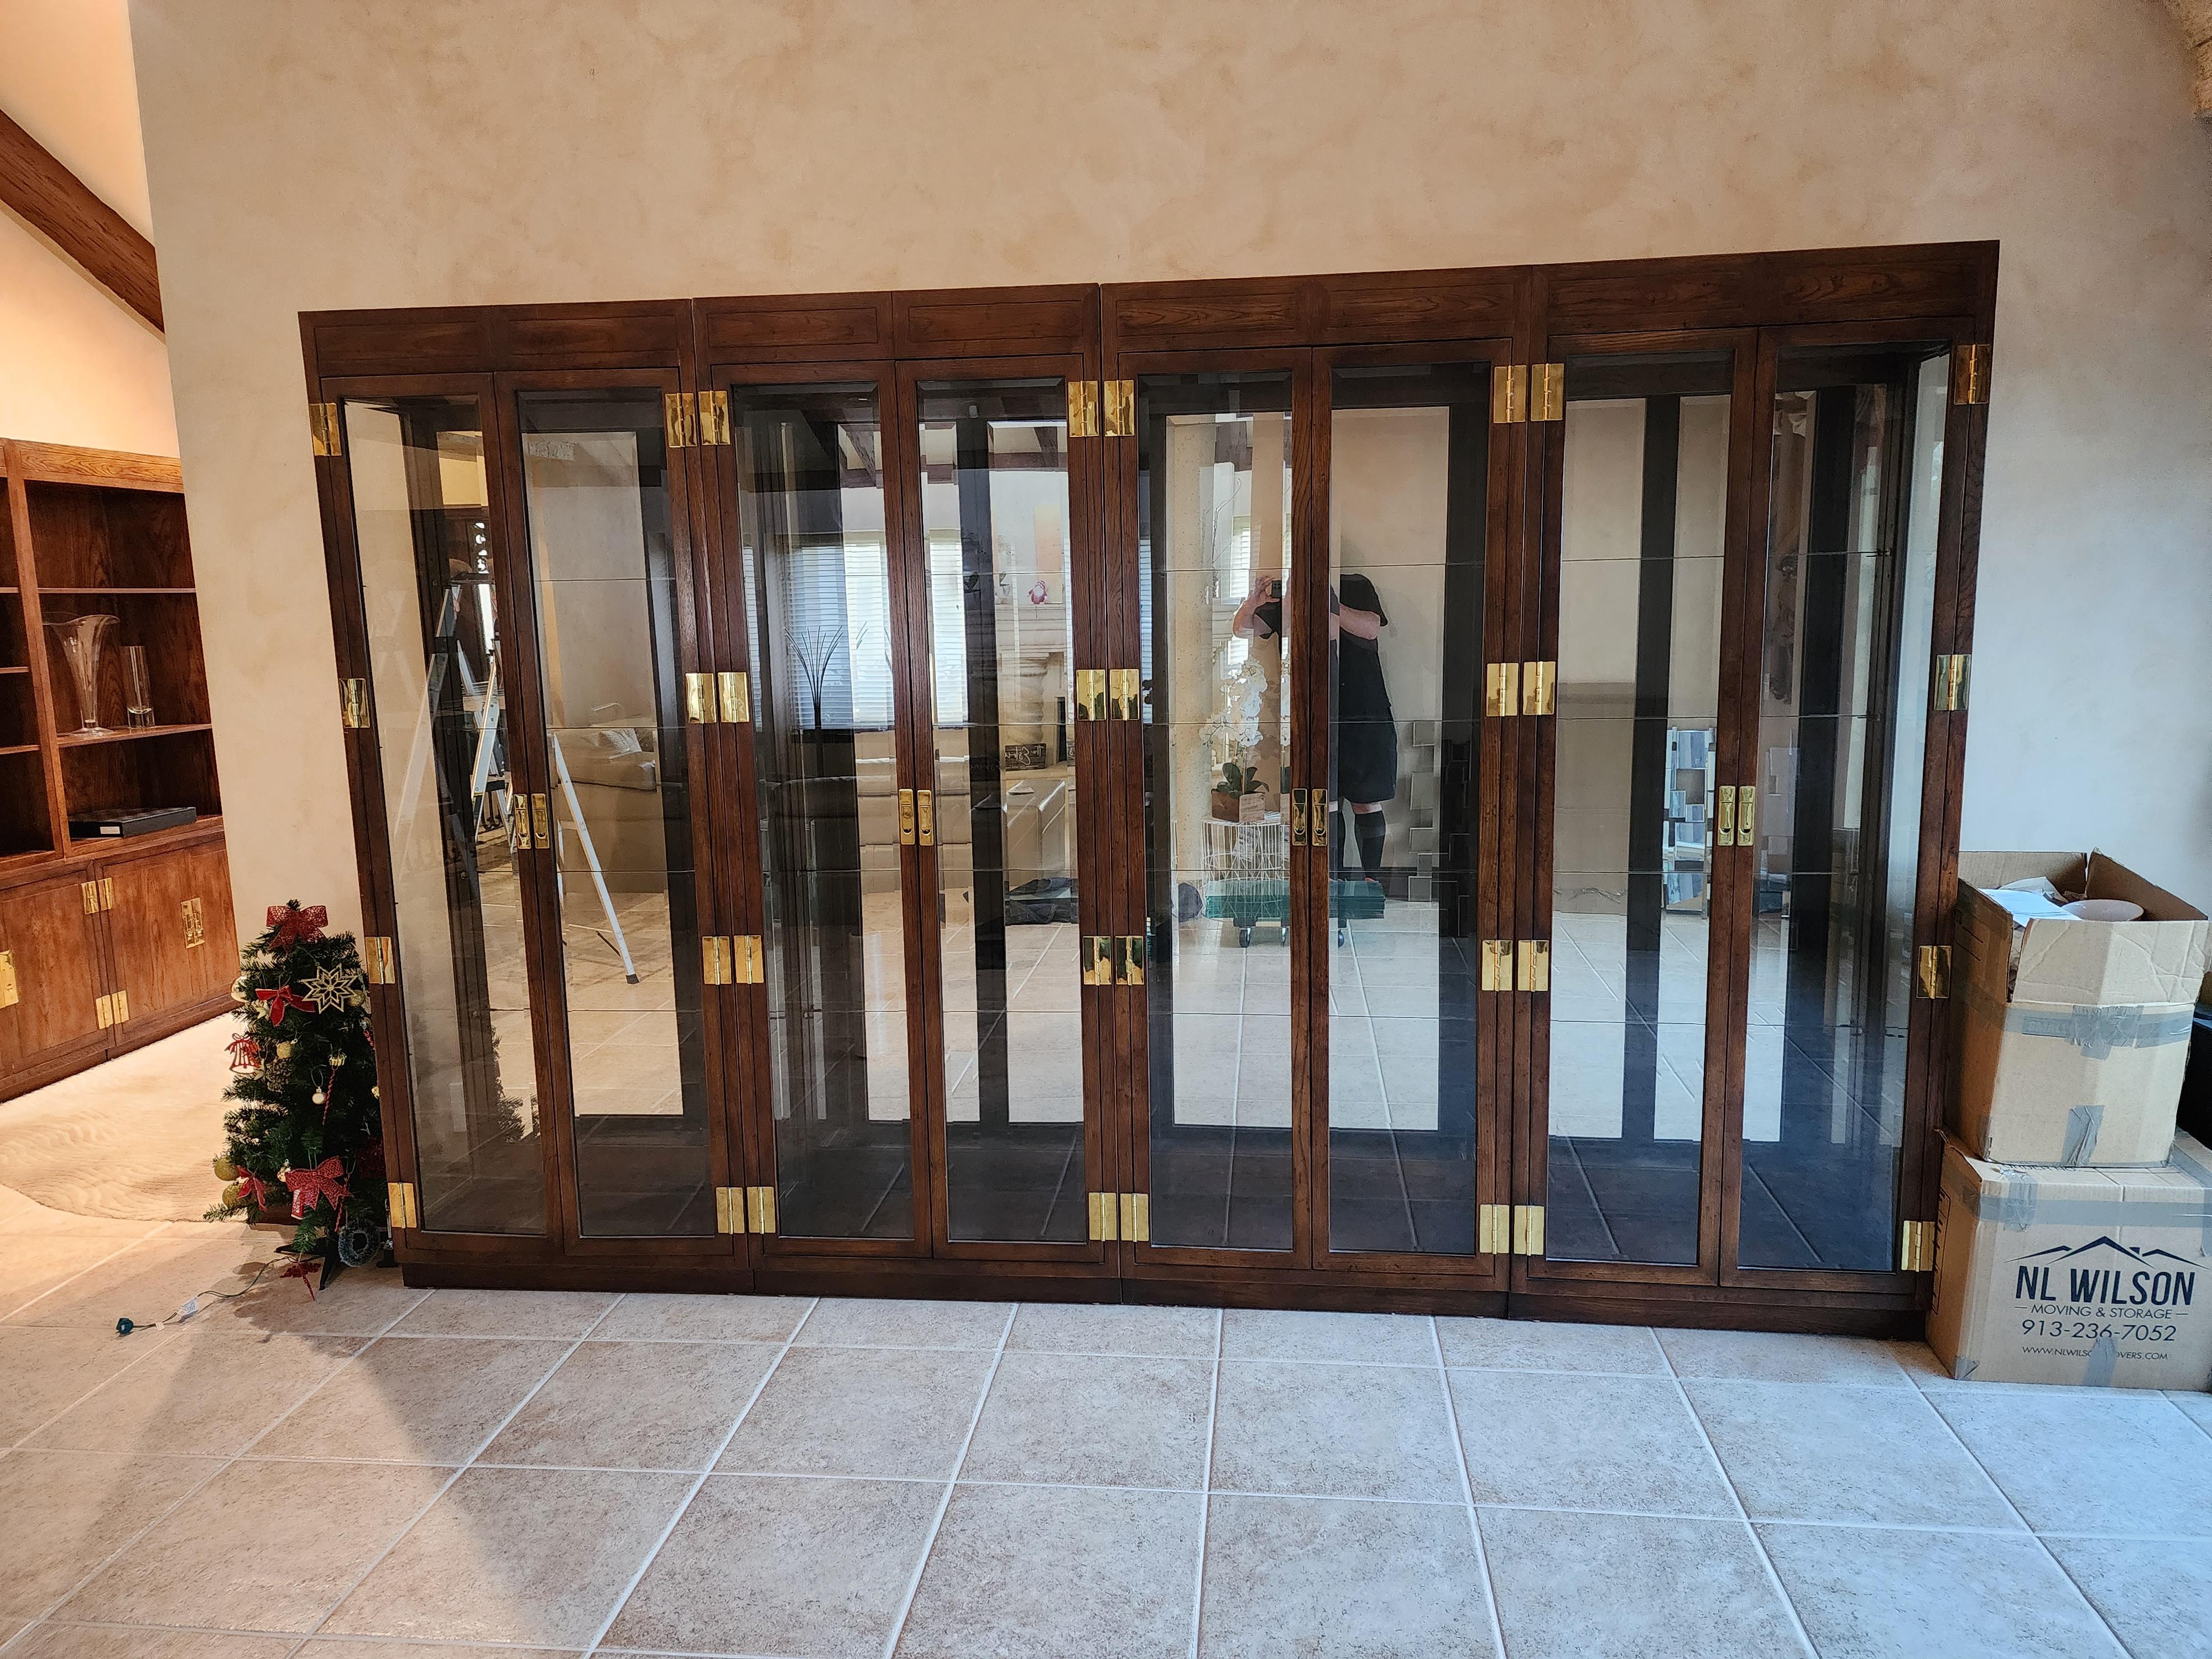 Offering One of our recent palm beach estate fine furniture acquisitions of a
Set of 4 1980's Henredon scene One campaign style Curio Display Cabinets Etageres
With 4 adjustable glass shelves with plate grooves (you can add or subtract shelves),